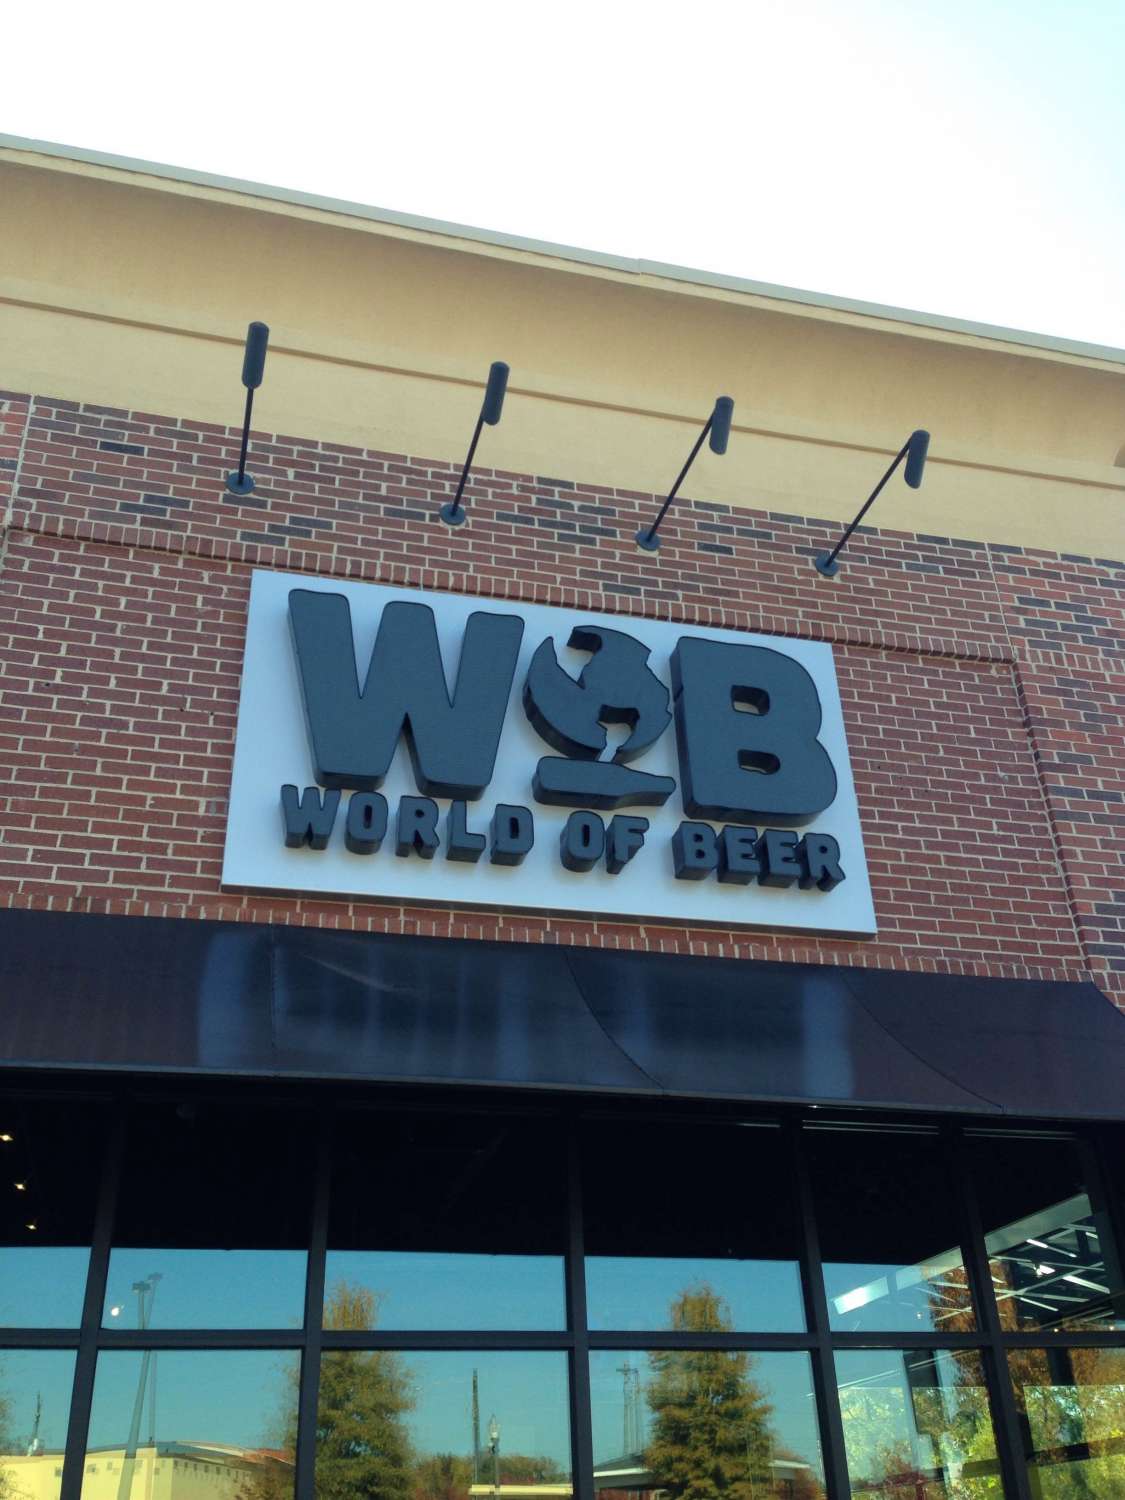 World of Beer Brings Over 500 Types of Beer to Kennesaw